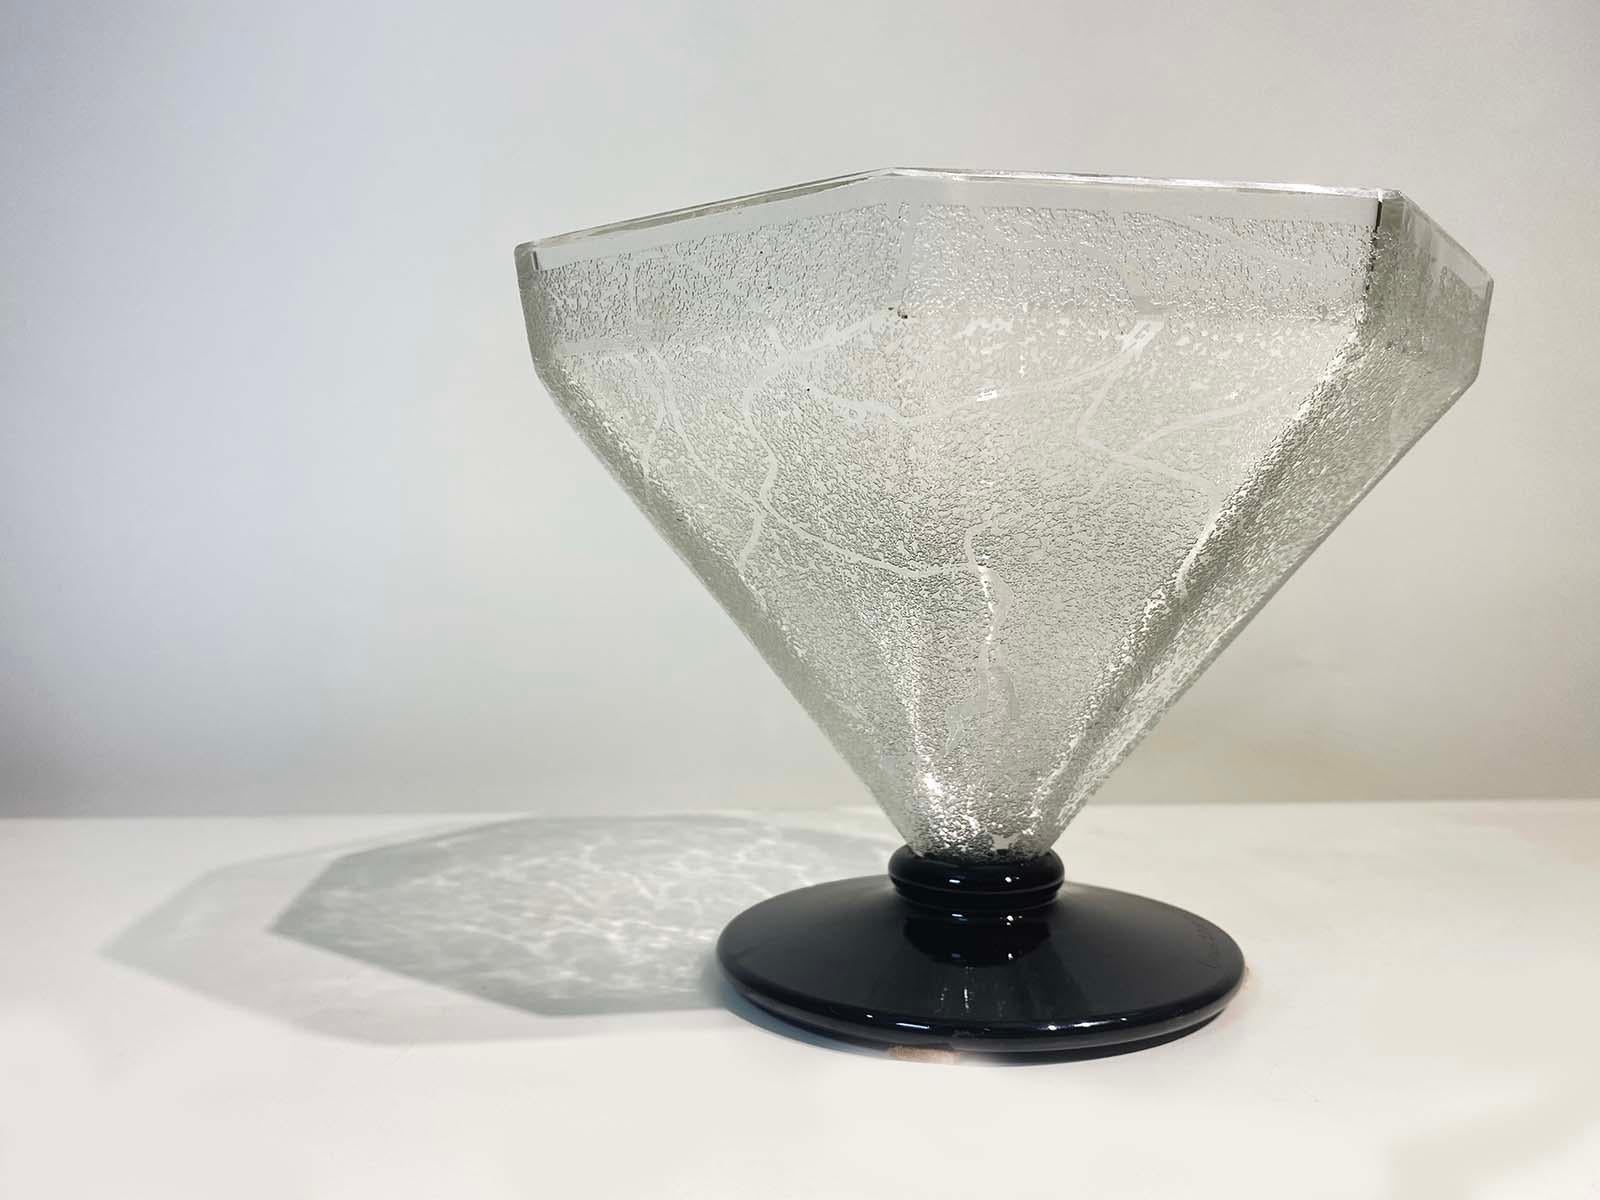 A beautiful acid etched vase signed Daum Nancy, france on it's black base circa 1930
Founded in 1878 by Jean Daum (1825–1885) in Nancy, France, Daum represents one of the preeminent studios of high quality glass and crystal in France's history.